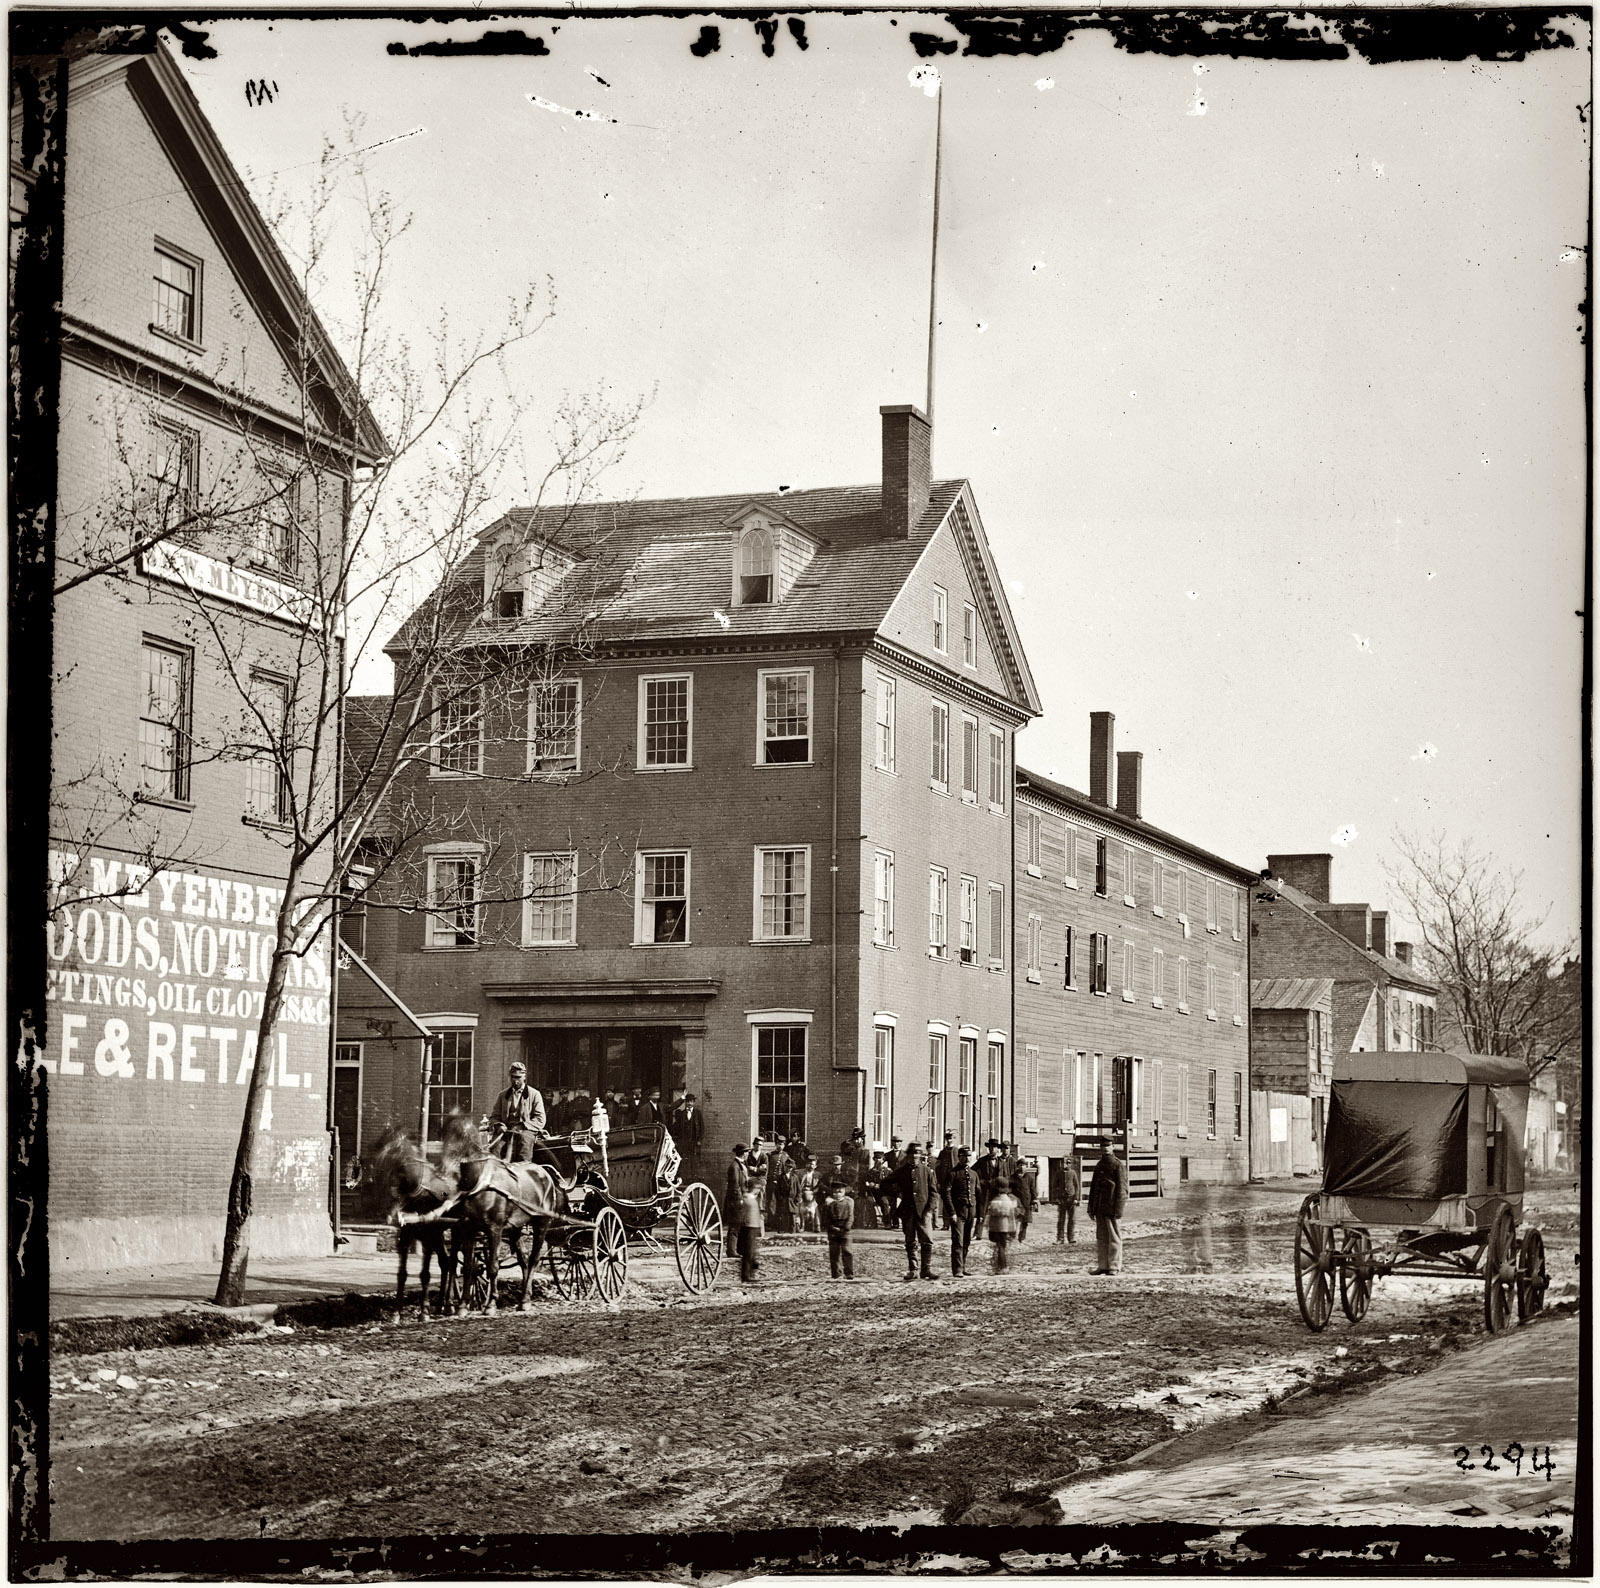 Alexandria, Va., 1861-69. "The Marshall house, King & Pitt Streets." Wet plate glass negative, left half of stereo pair. Photographer unknown. View full size.